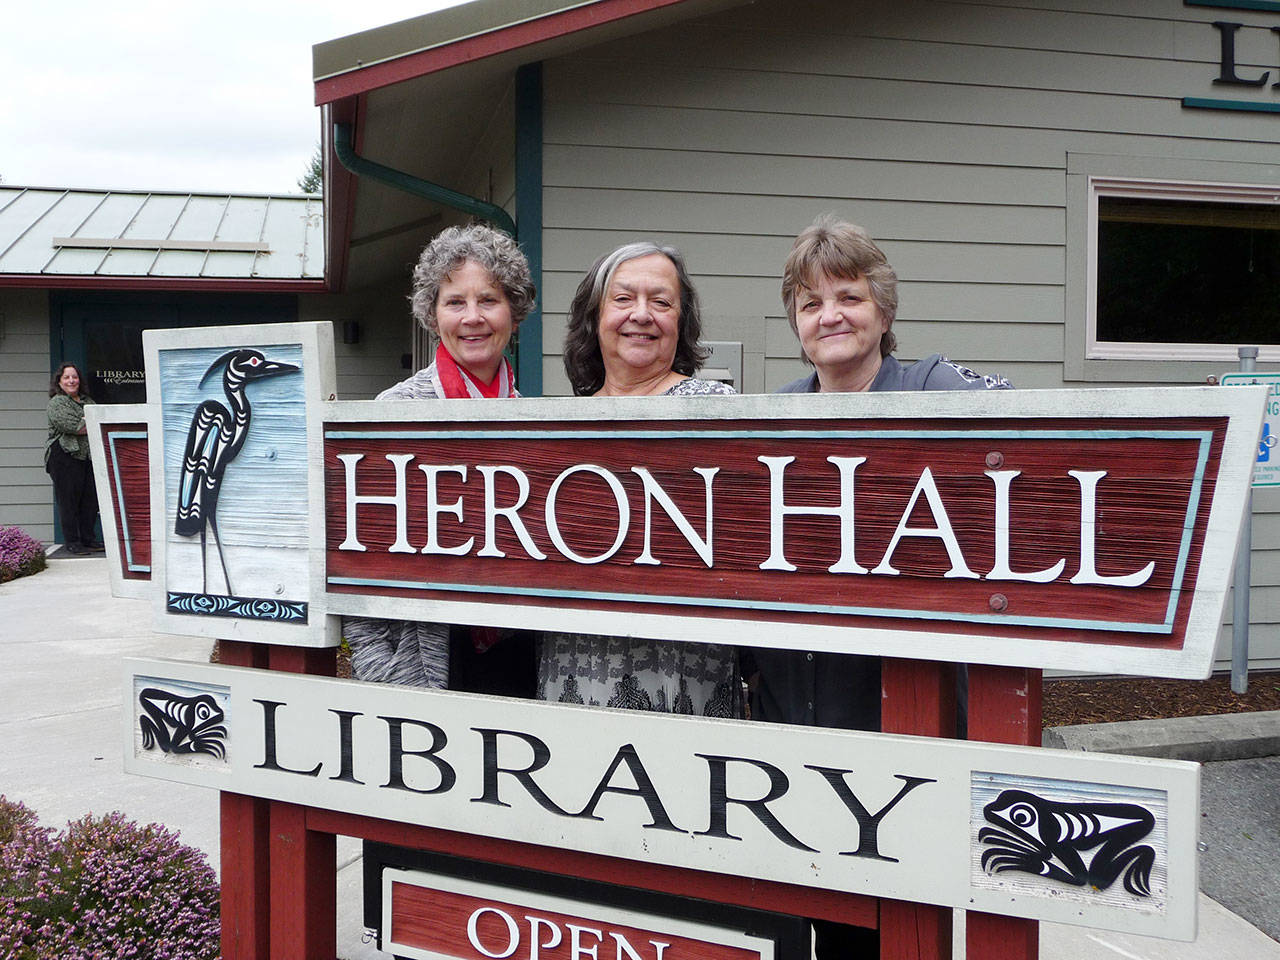 Staff members of the Jamestown S’Klallam Tribal Library are, from left, librarian Bonnie Roos, tribal elder Gloria Smith and Jan Jacobson. (Patricia Morrison Coate/Olympic Peninsula News Group)